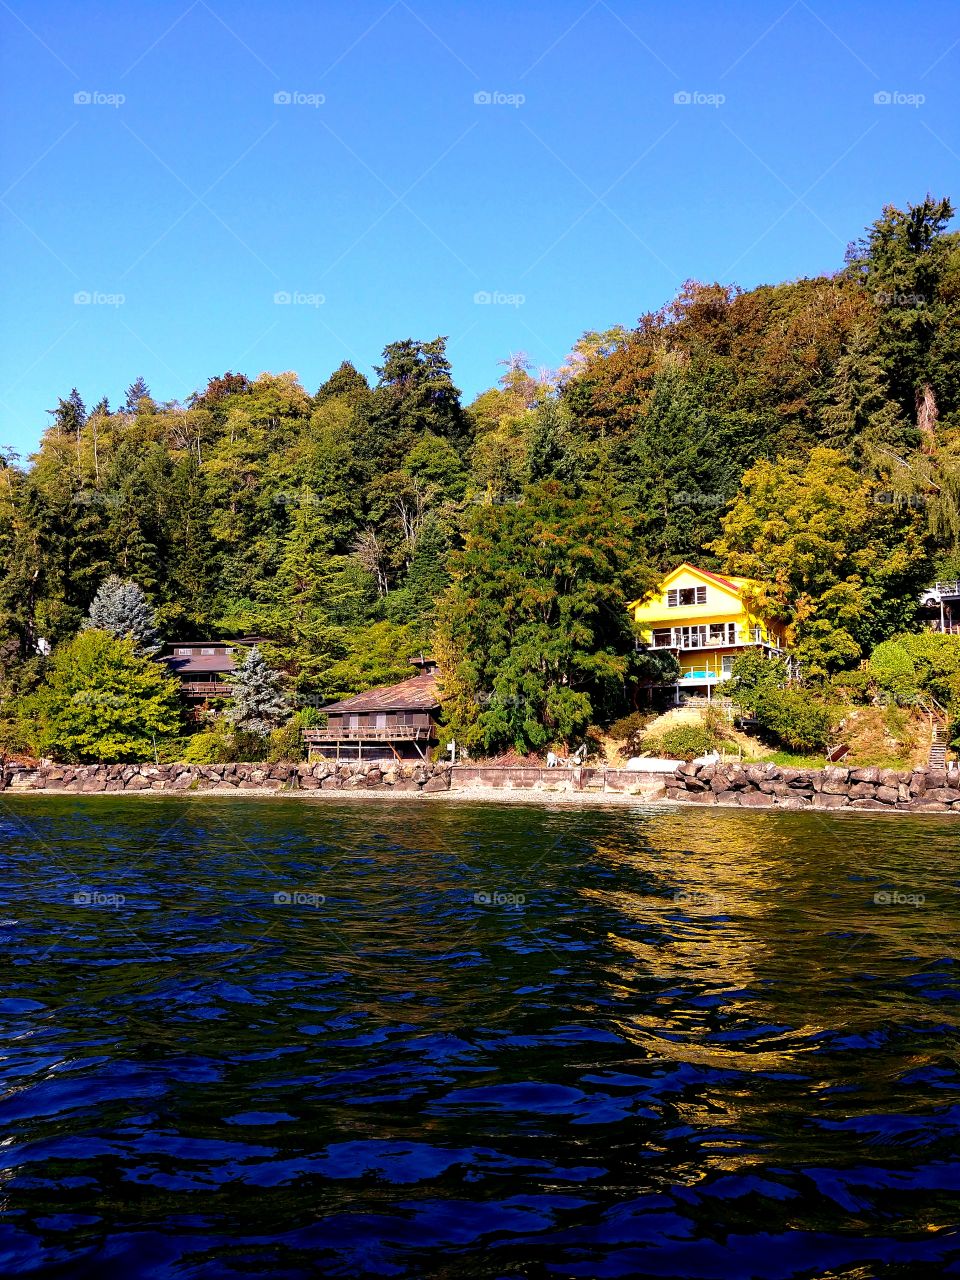 I really love how yellow this house is. Its crazy noticeable from the water.